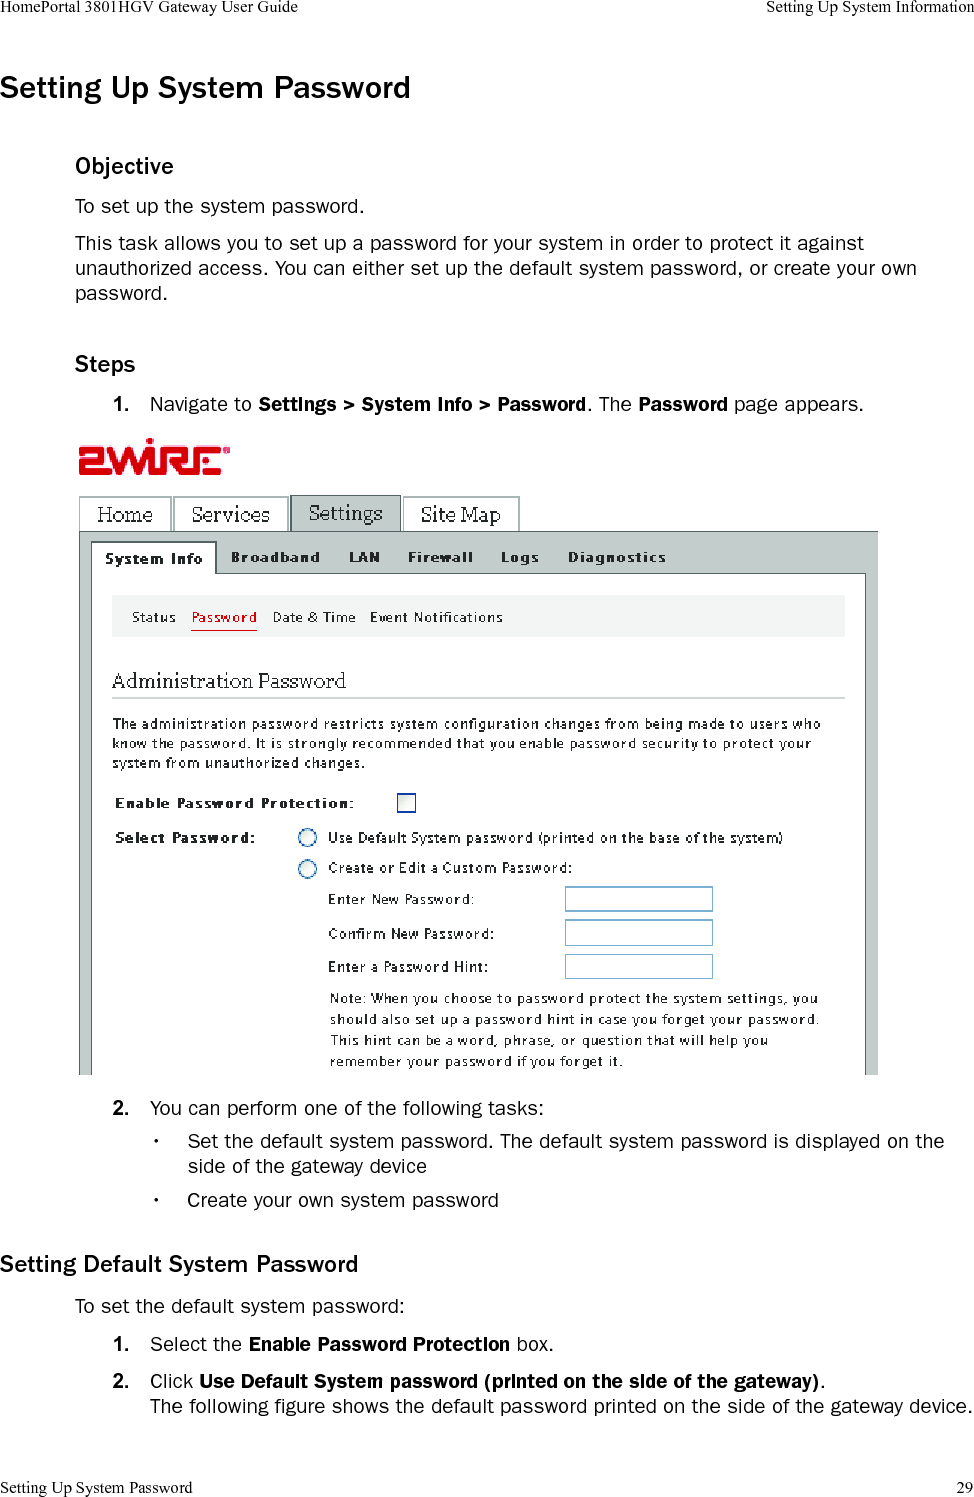 Setting Up System Password 29HomePortal 3801HGV Gateway User Guide Setting Up System InformationSetting Up System PasswordObjectiveTo set up the system password.This task allows you to set up a password for your system in order to protect it against unauthorized access. You can either set up the default system password, or create your own password.Steps1. Navigate to Settings &gt; System Info &gt; Password. The Password page appears.2. You can perform one of the following tasks:• Set the default system password. The default system password is displayed on the side of the gateway device• Create your own system passwordSetting Default System PasswordTo set the default system password:1. Select the Enable Password Protection box.2. Click Use Default System password (printed on the side of the gateway).The following figure shows the default password printed on the side of the gateway device.